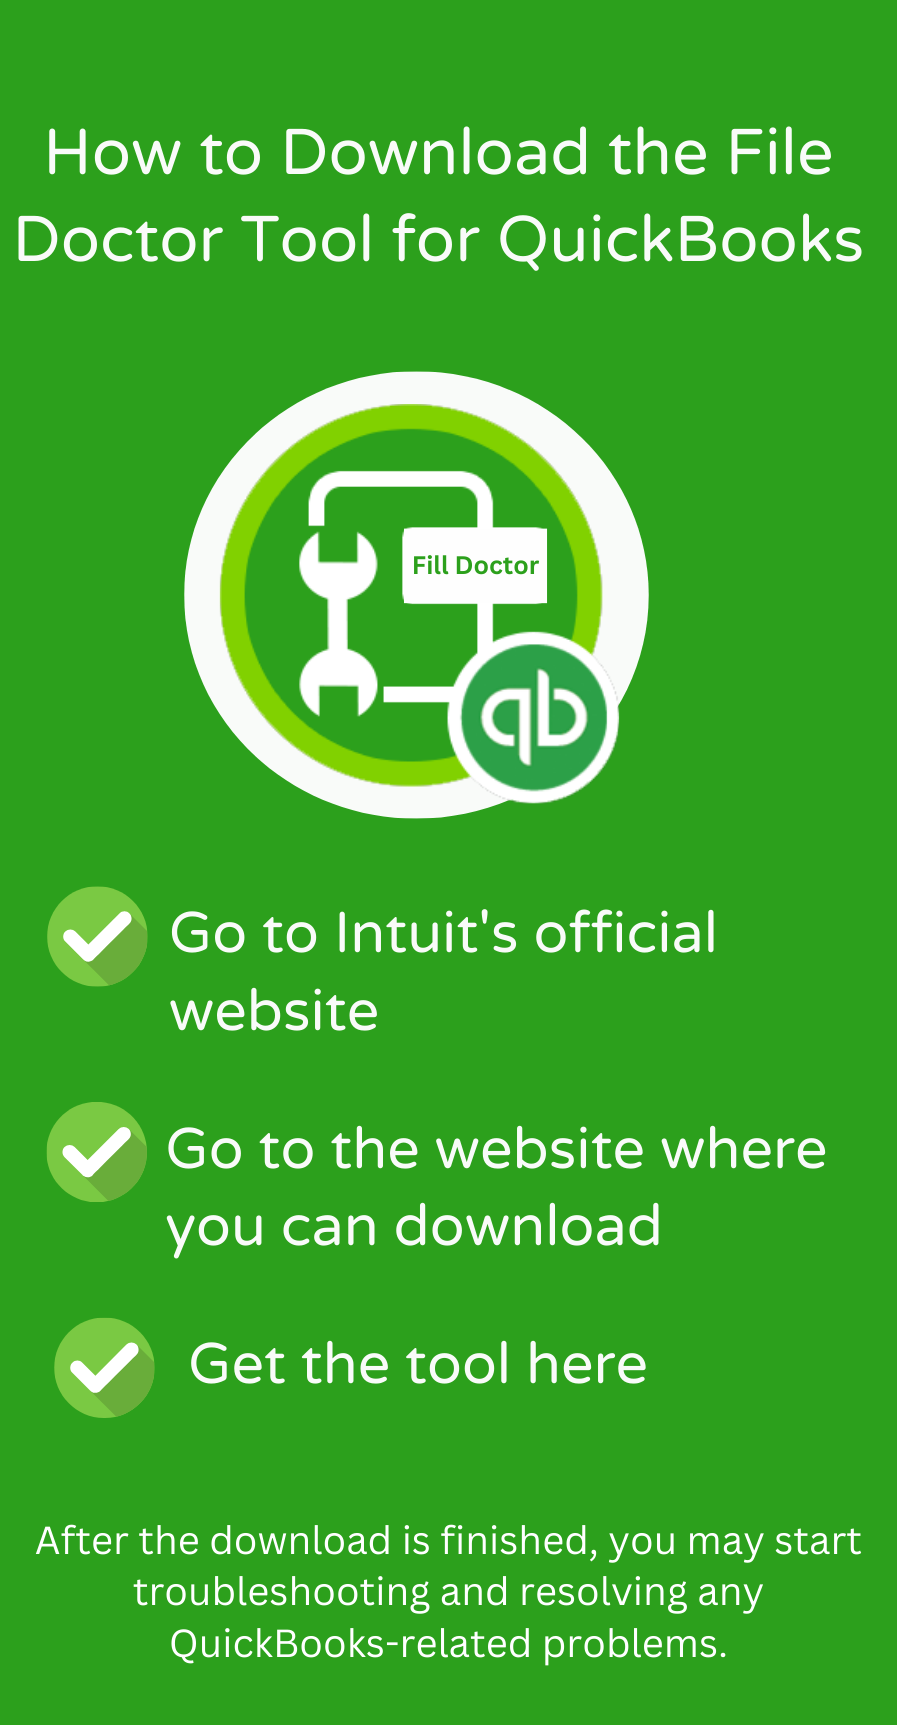 How to Download the File Doctor Tool for QuickBooks